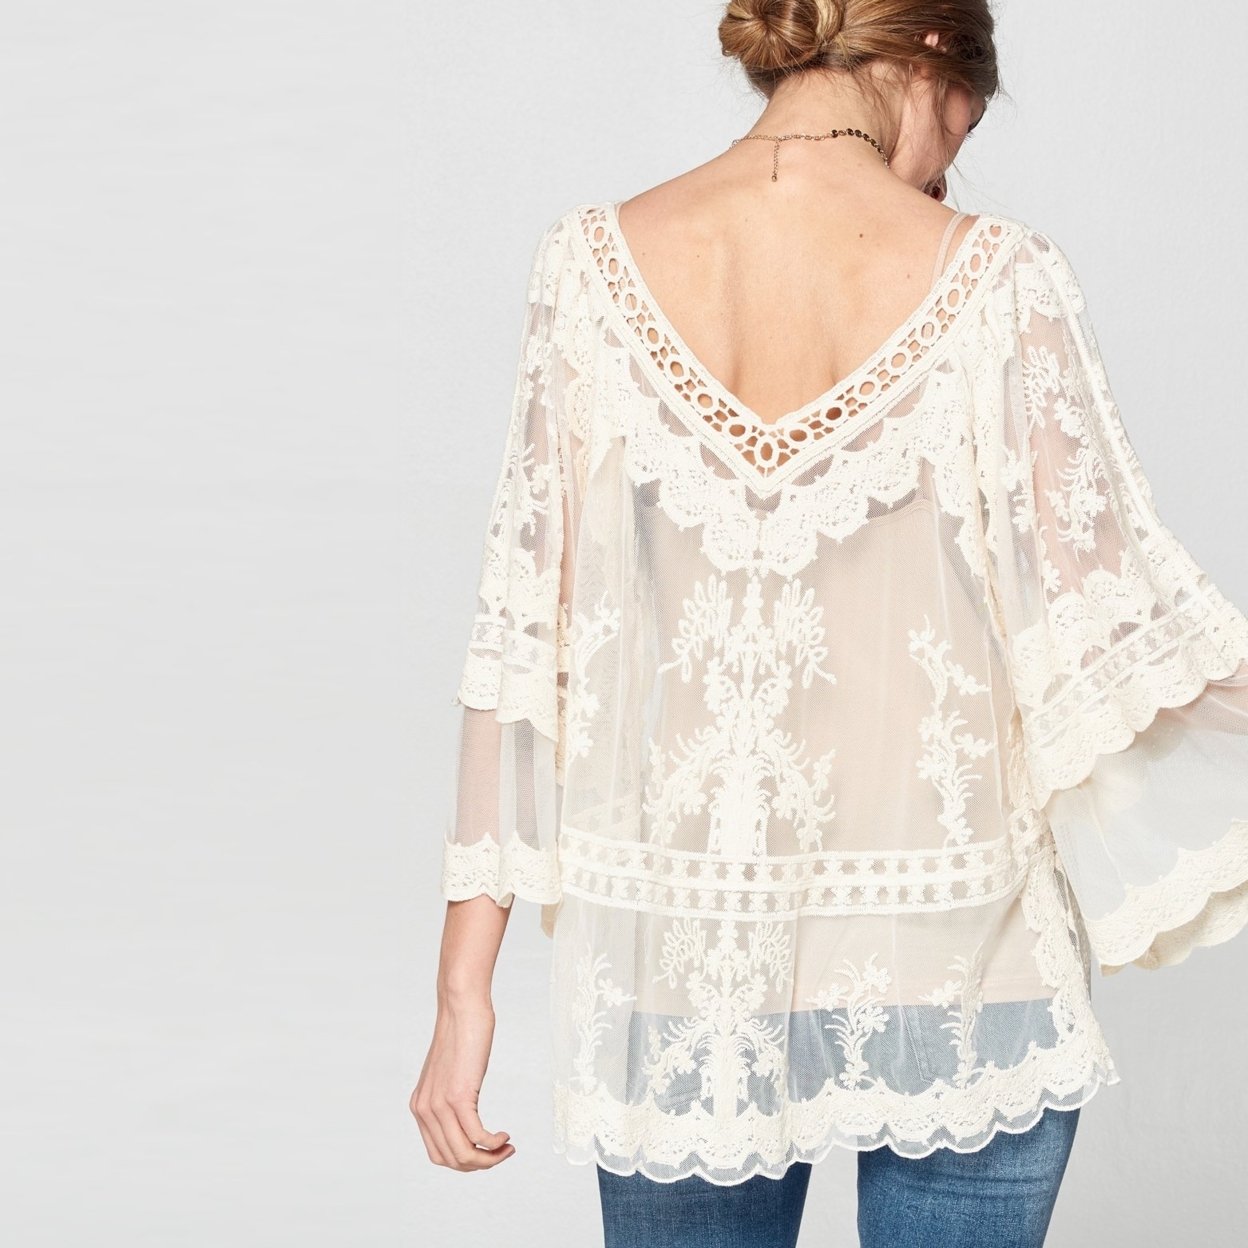 Embroidered Fleur Lace Top - Ivory, Medium (8-10)